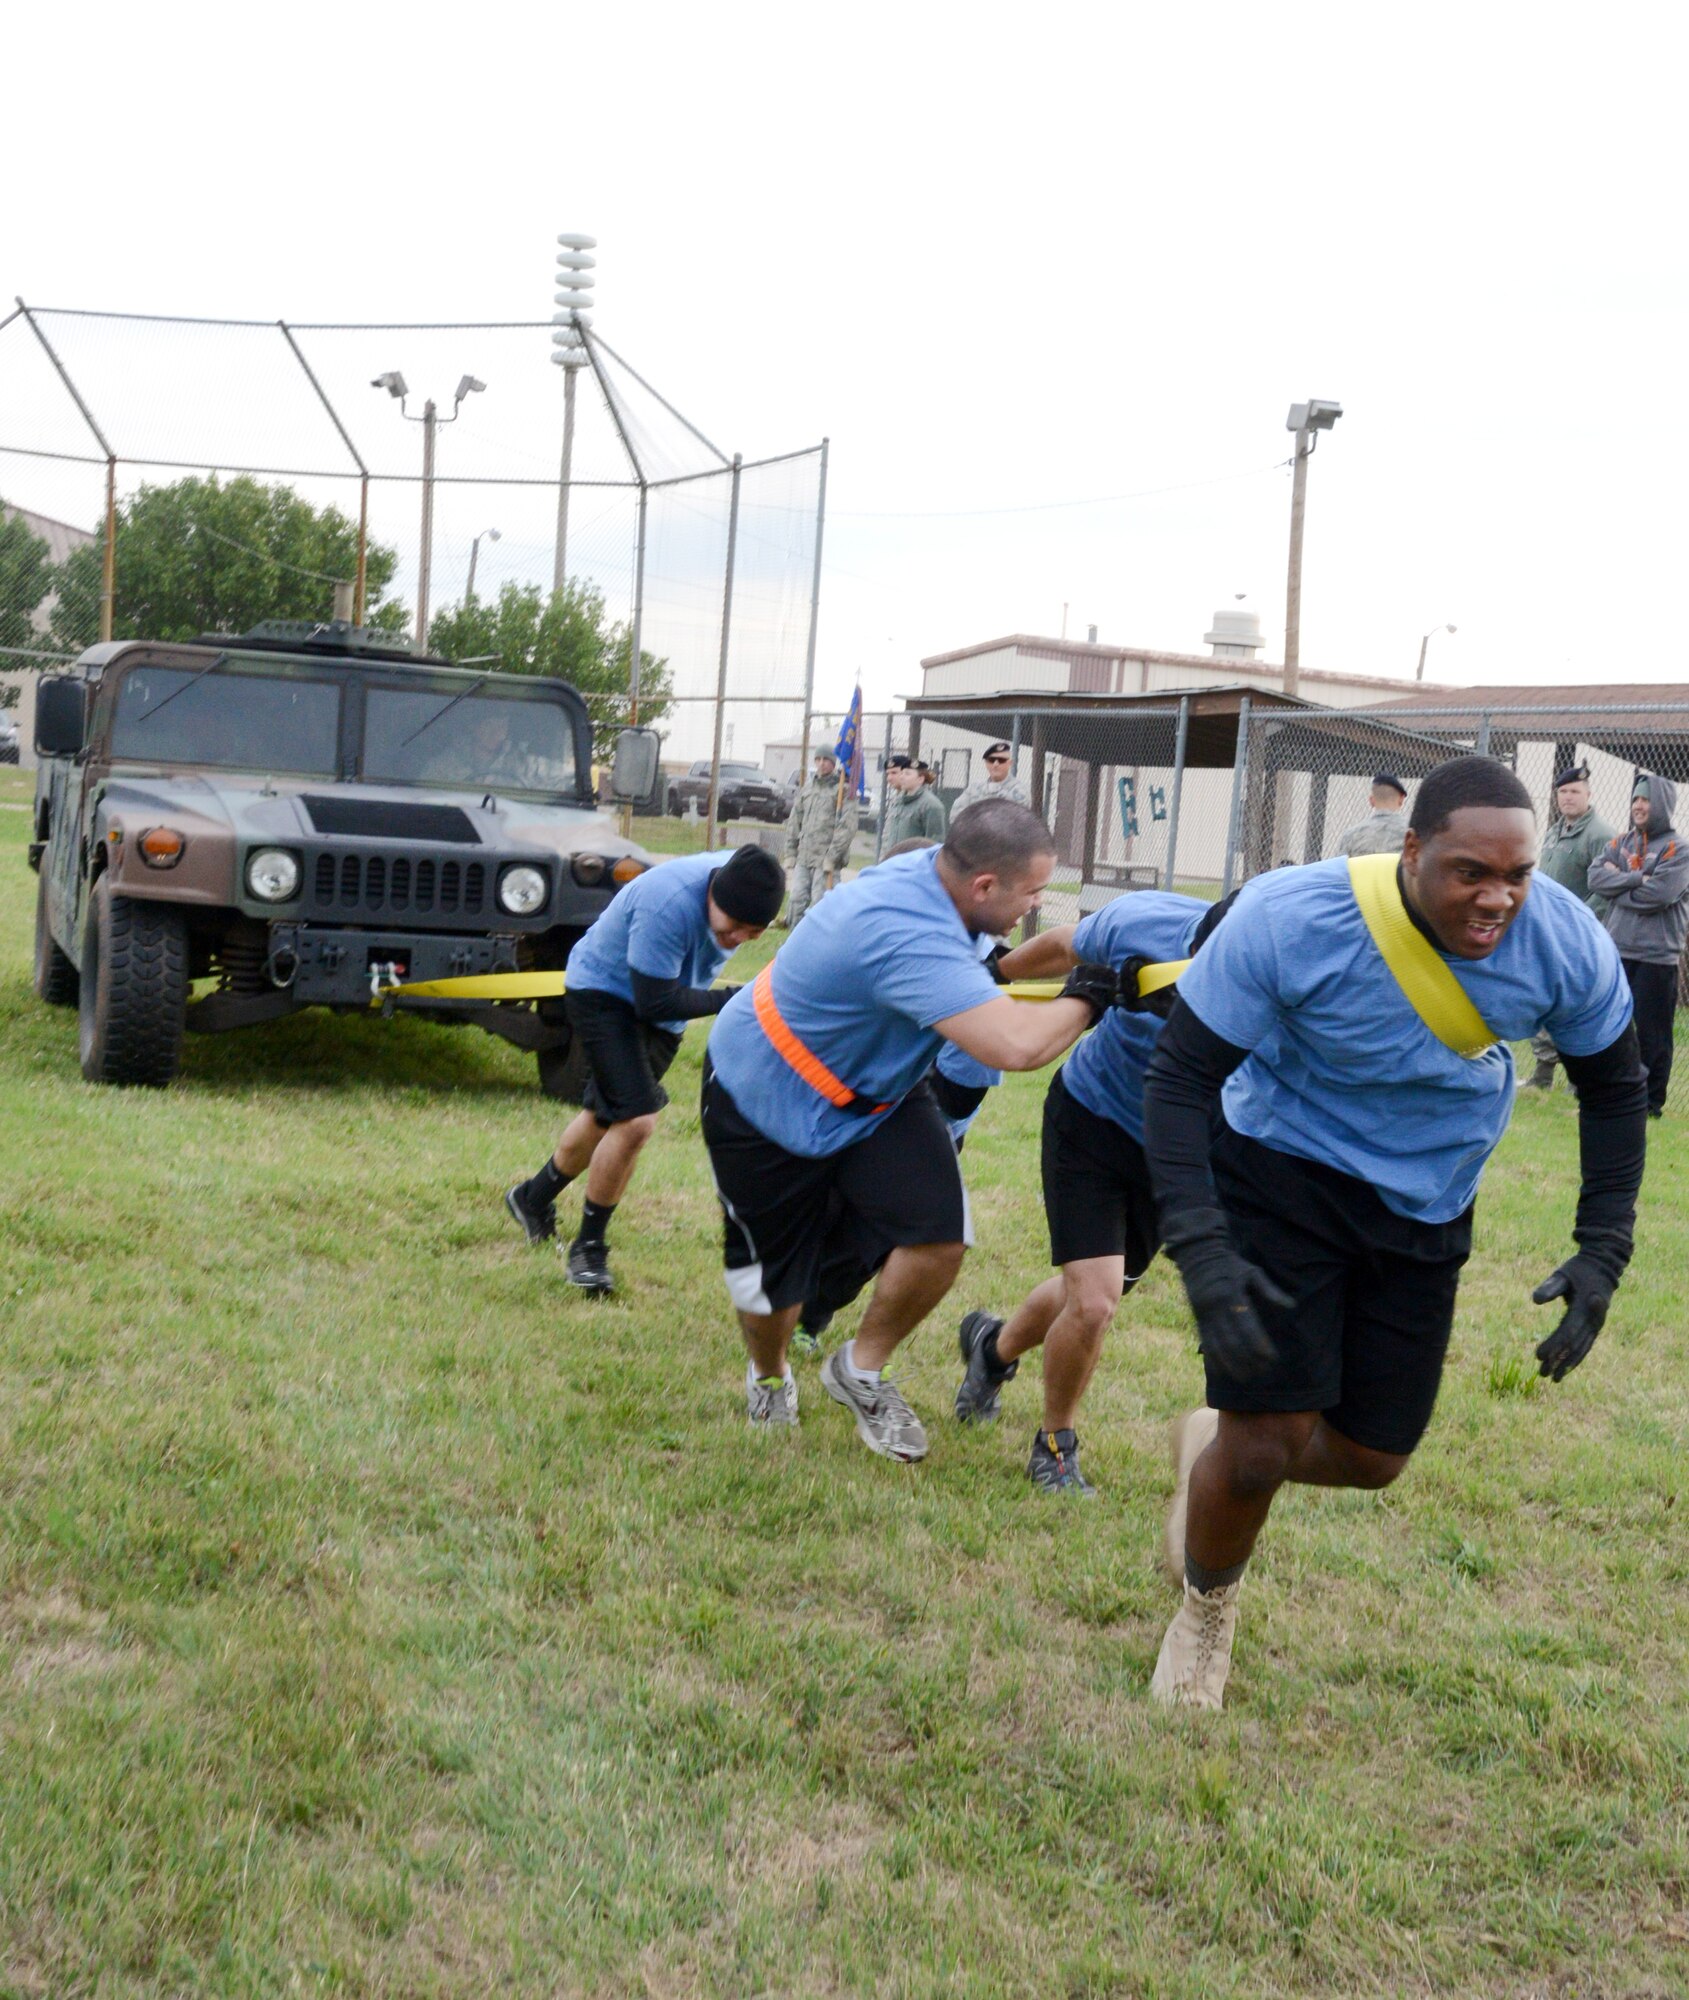 During last week's Police Week Games, several teams competed in a series of events focusing on strength and agility such as a tire flip, a push-up obstacle course, a Humvee pull, an ammo can dash and a water balloon sling. During the Humvee pull, team members had to physically pull a Humvee several yards, trying to finish with a faster time than the other teams. (Air Force photo by Kelly White)